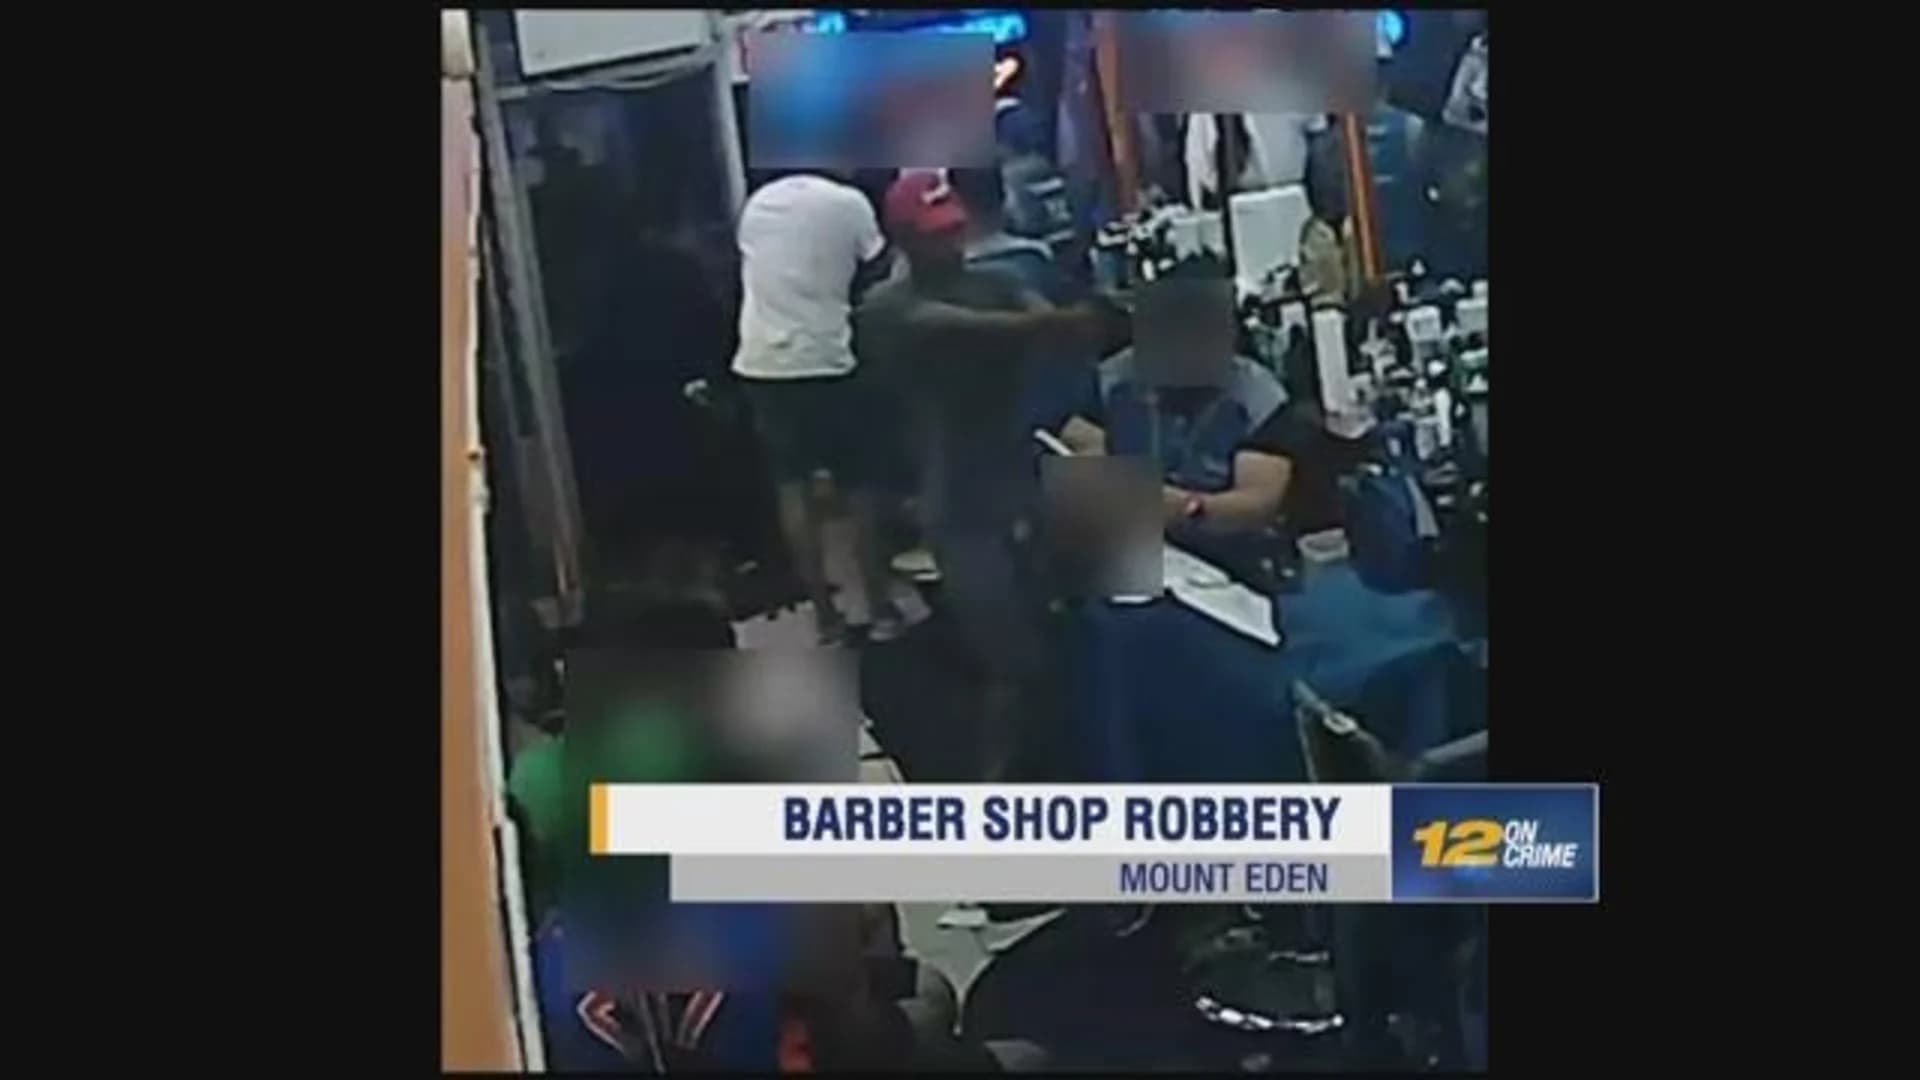 Police search for 2 barbershop robbery suspects in Mount Eden